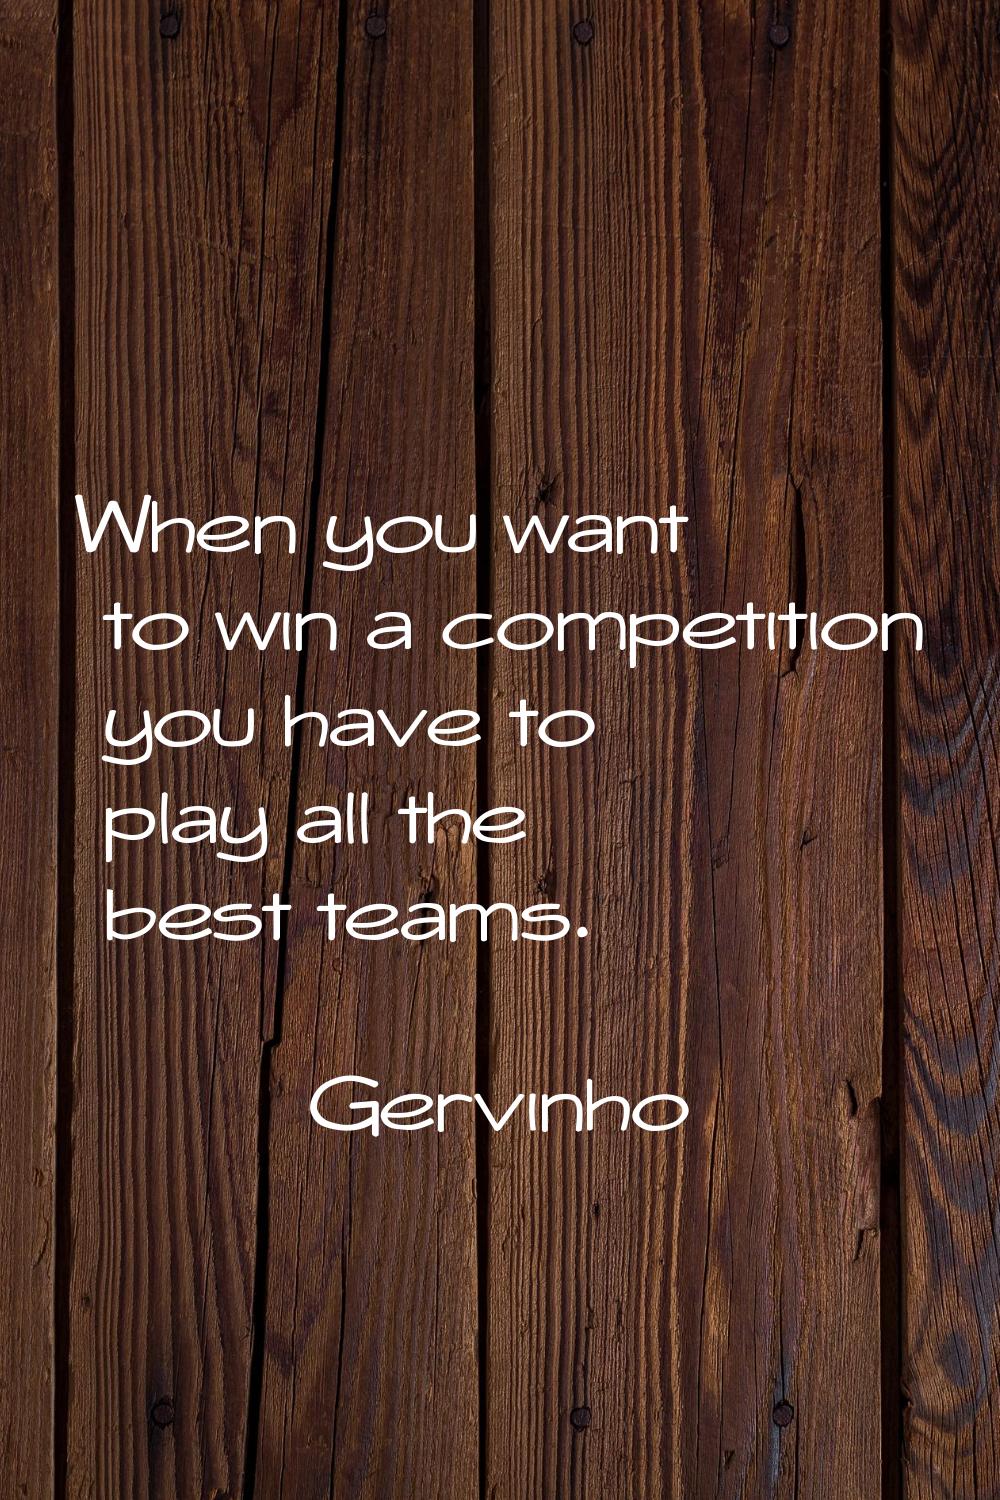 When you want to win a competition you have to play all the best teams.